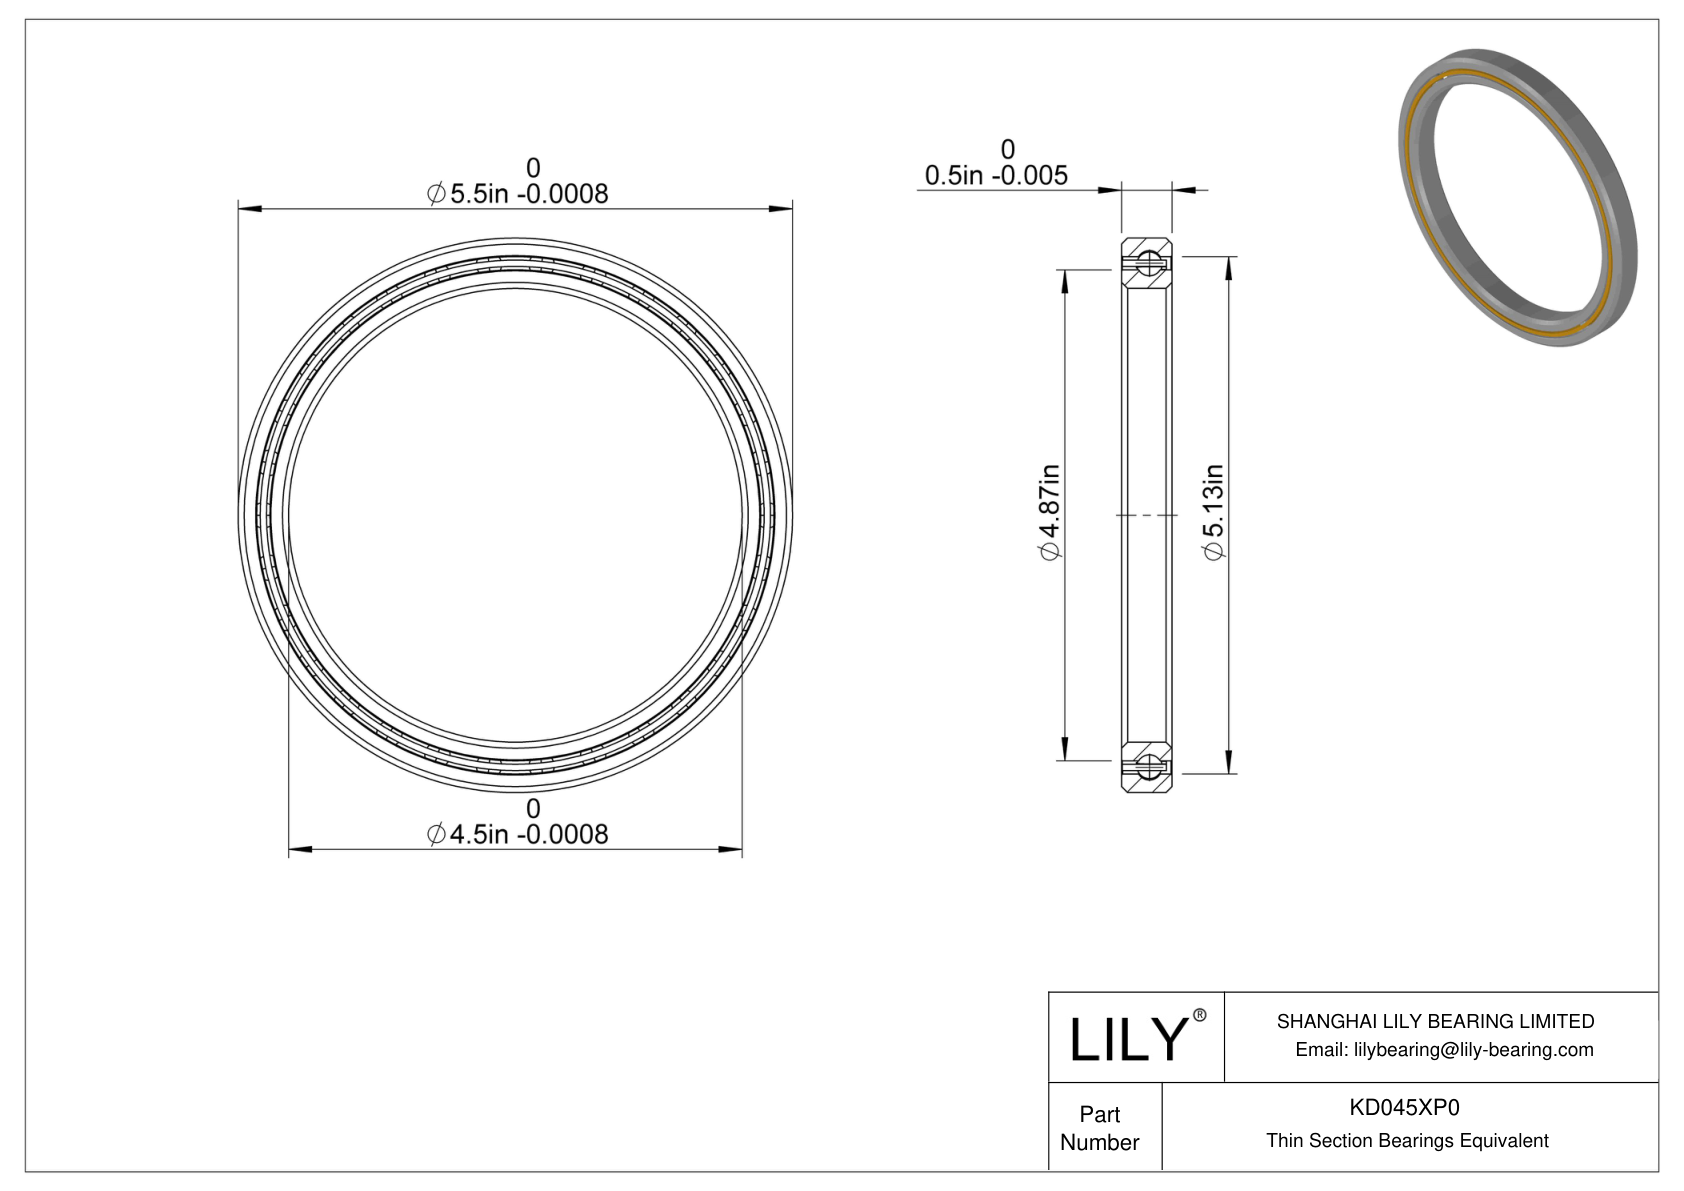 KD045XP0 Constant Section (CS) Bearings cad drawing